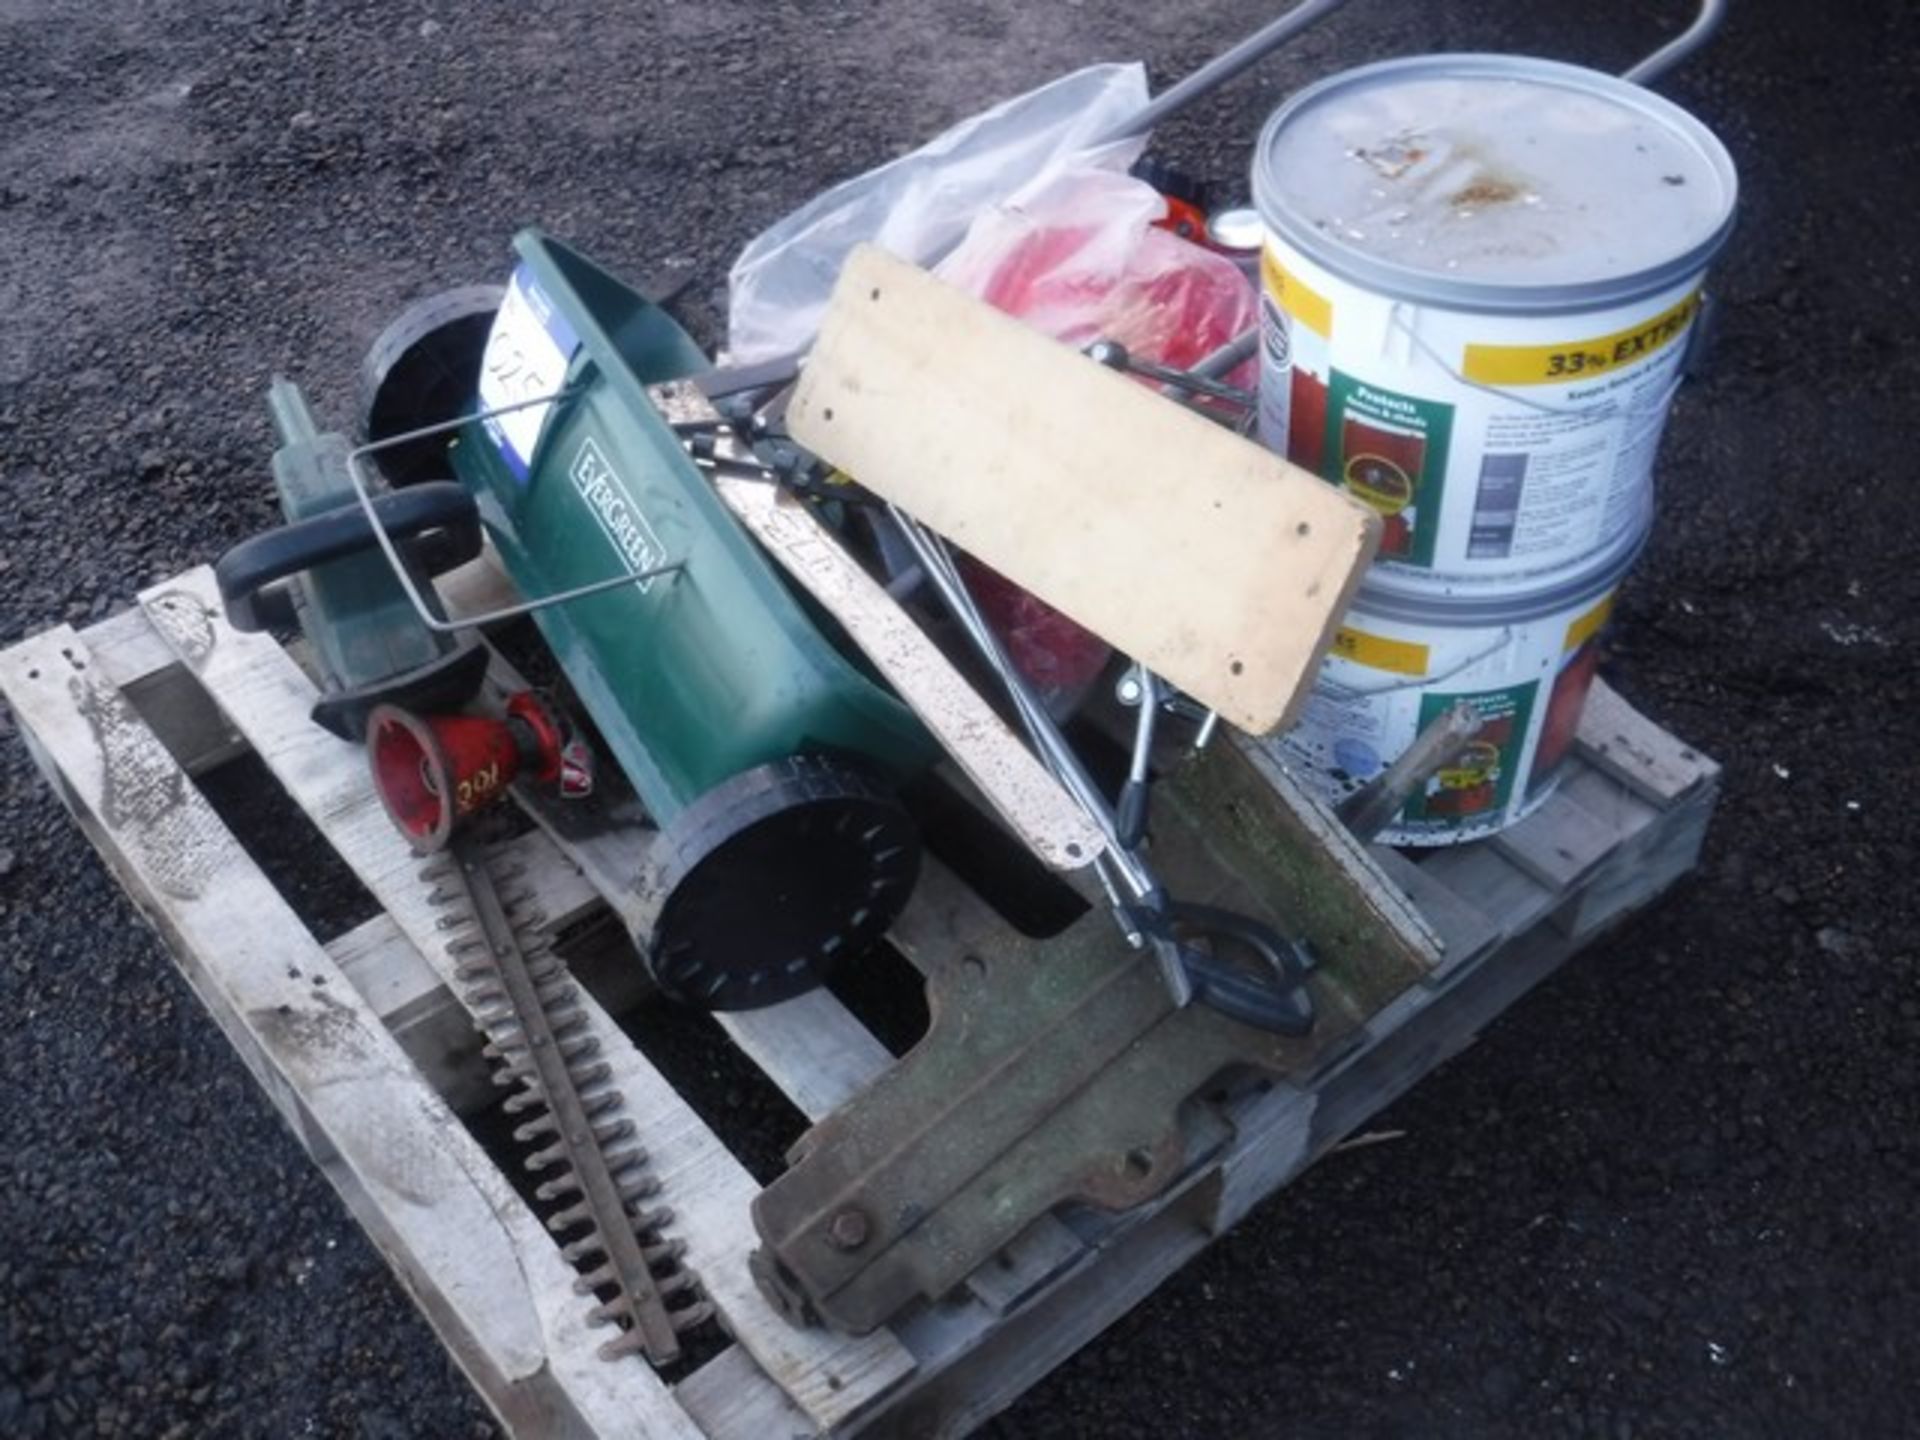 VARIOUS TOOLS - LAWN SPREADER, JACKS, VICE, DRUMS OF FENCE PAINT - Image 4 of 5